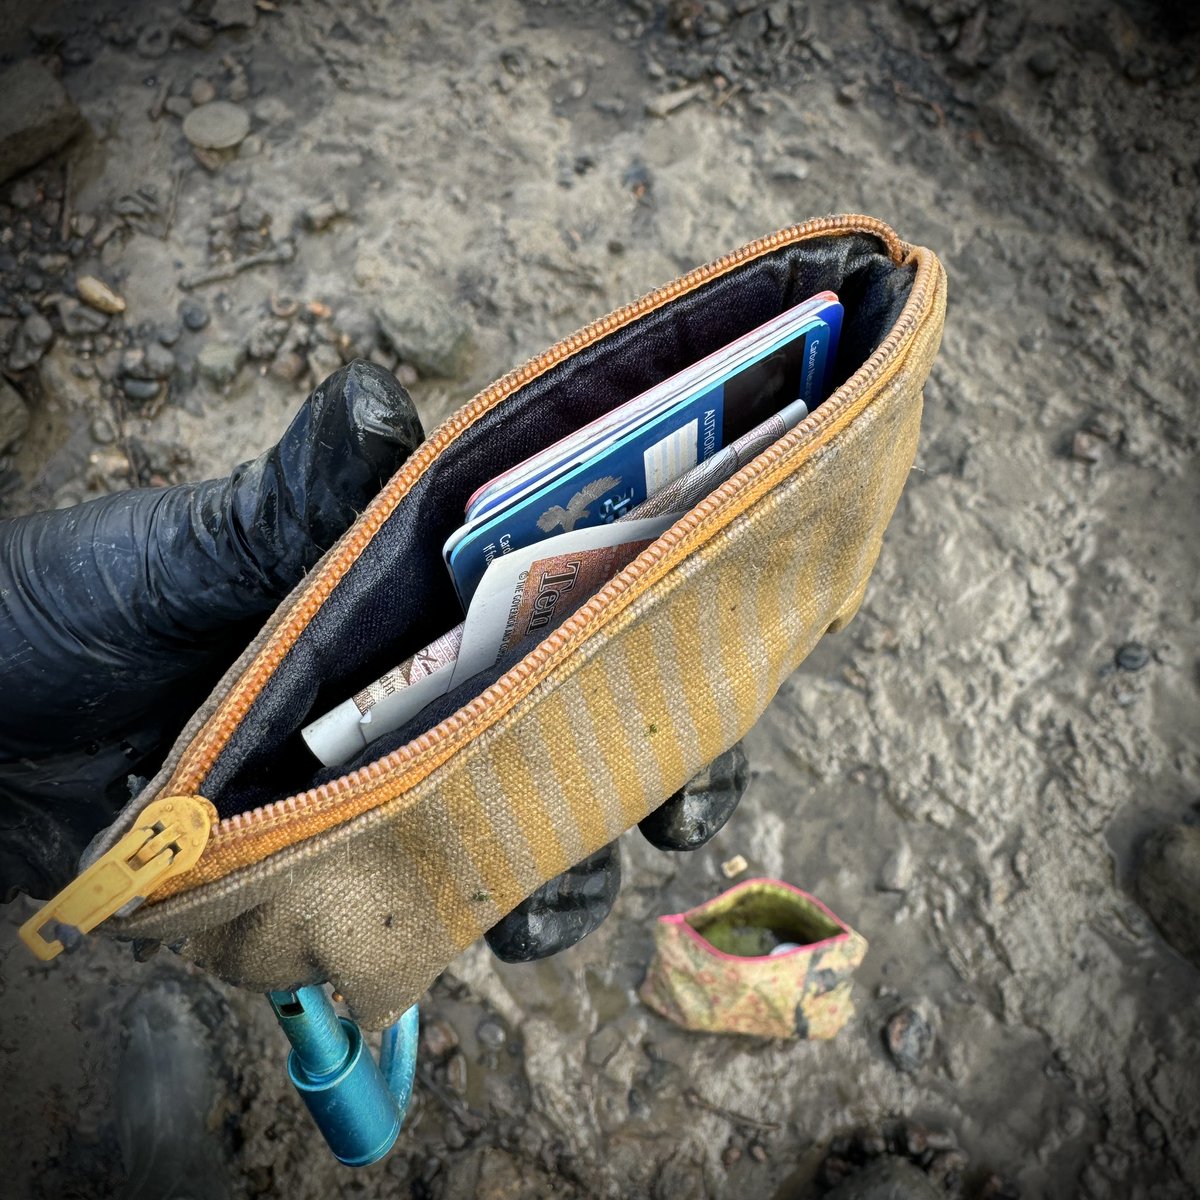 The purses and bags I find are usually empty, cleared out by thieves before they’re dumped in the river. This one is full though, so now to try and get it back to its owner. #Mudlark #mudlarking #Larking